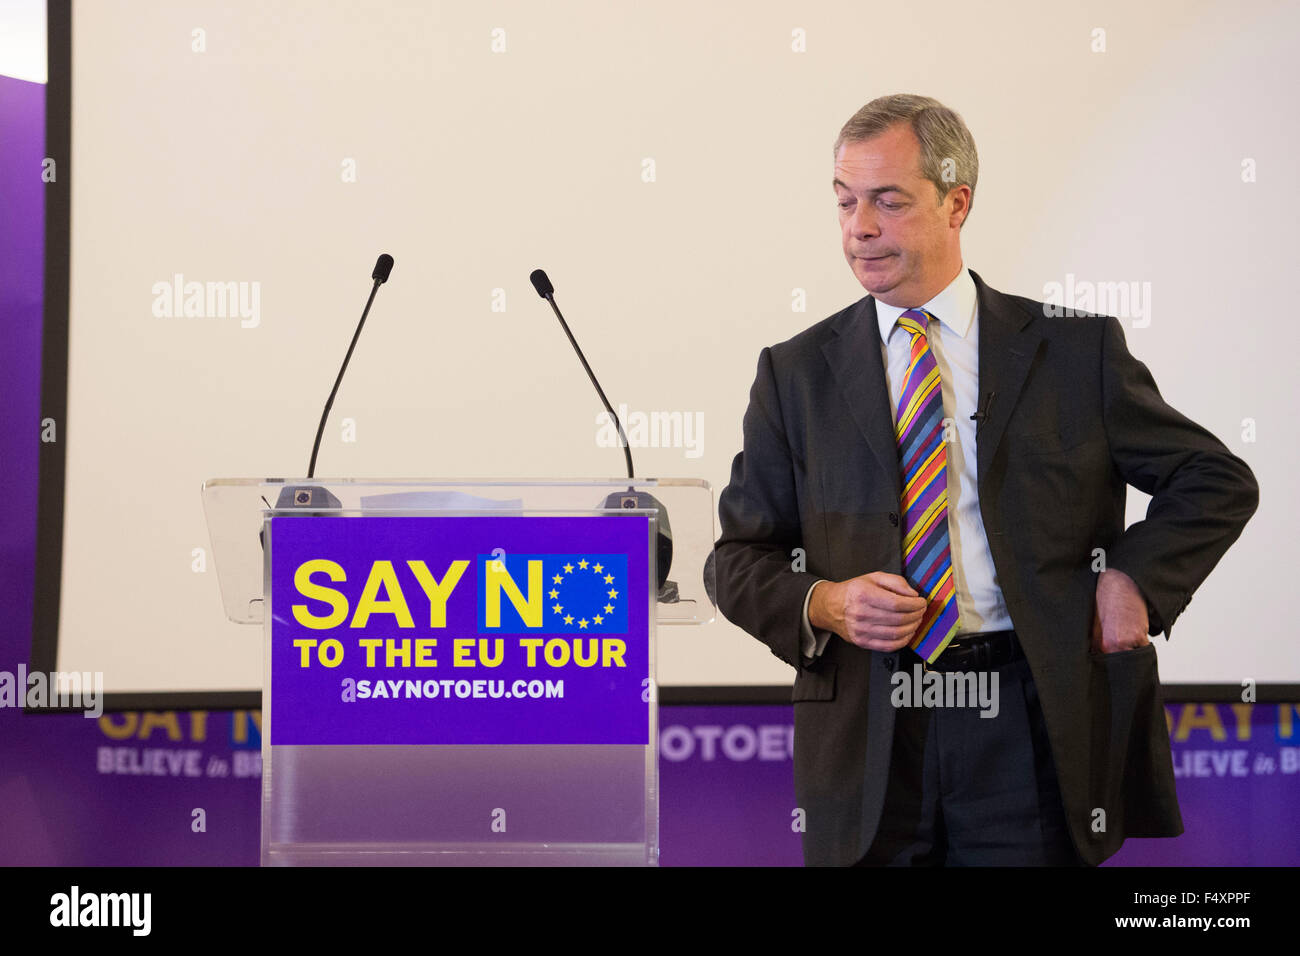 UK Independence Party (UKIP) leader Nigel Farage a Swansea durante il 'say No per il tour dell'UE". Foto Stock